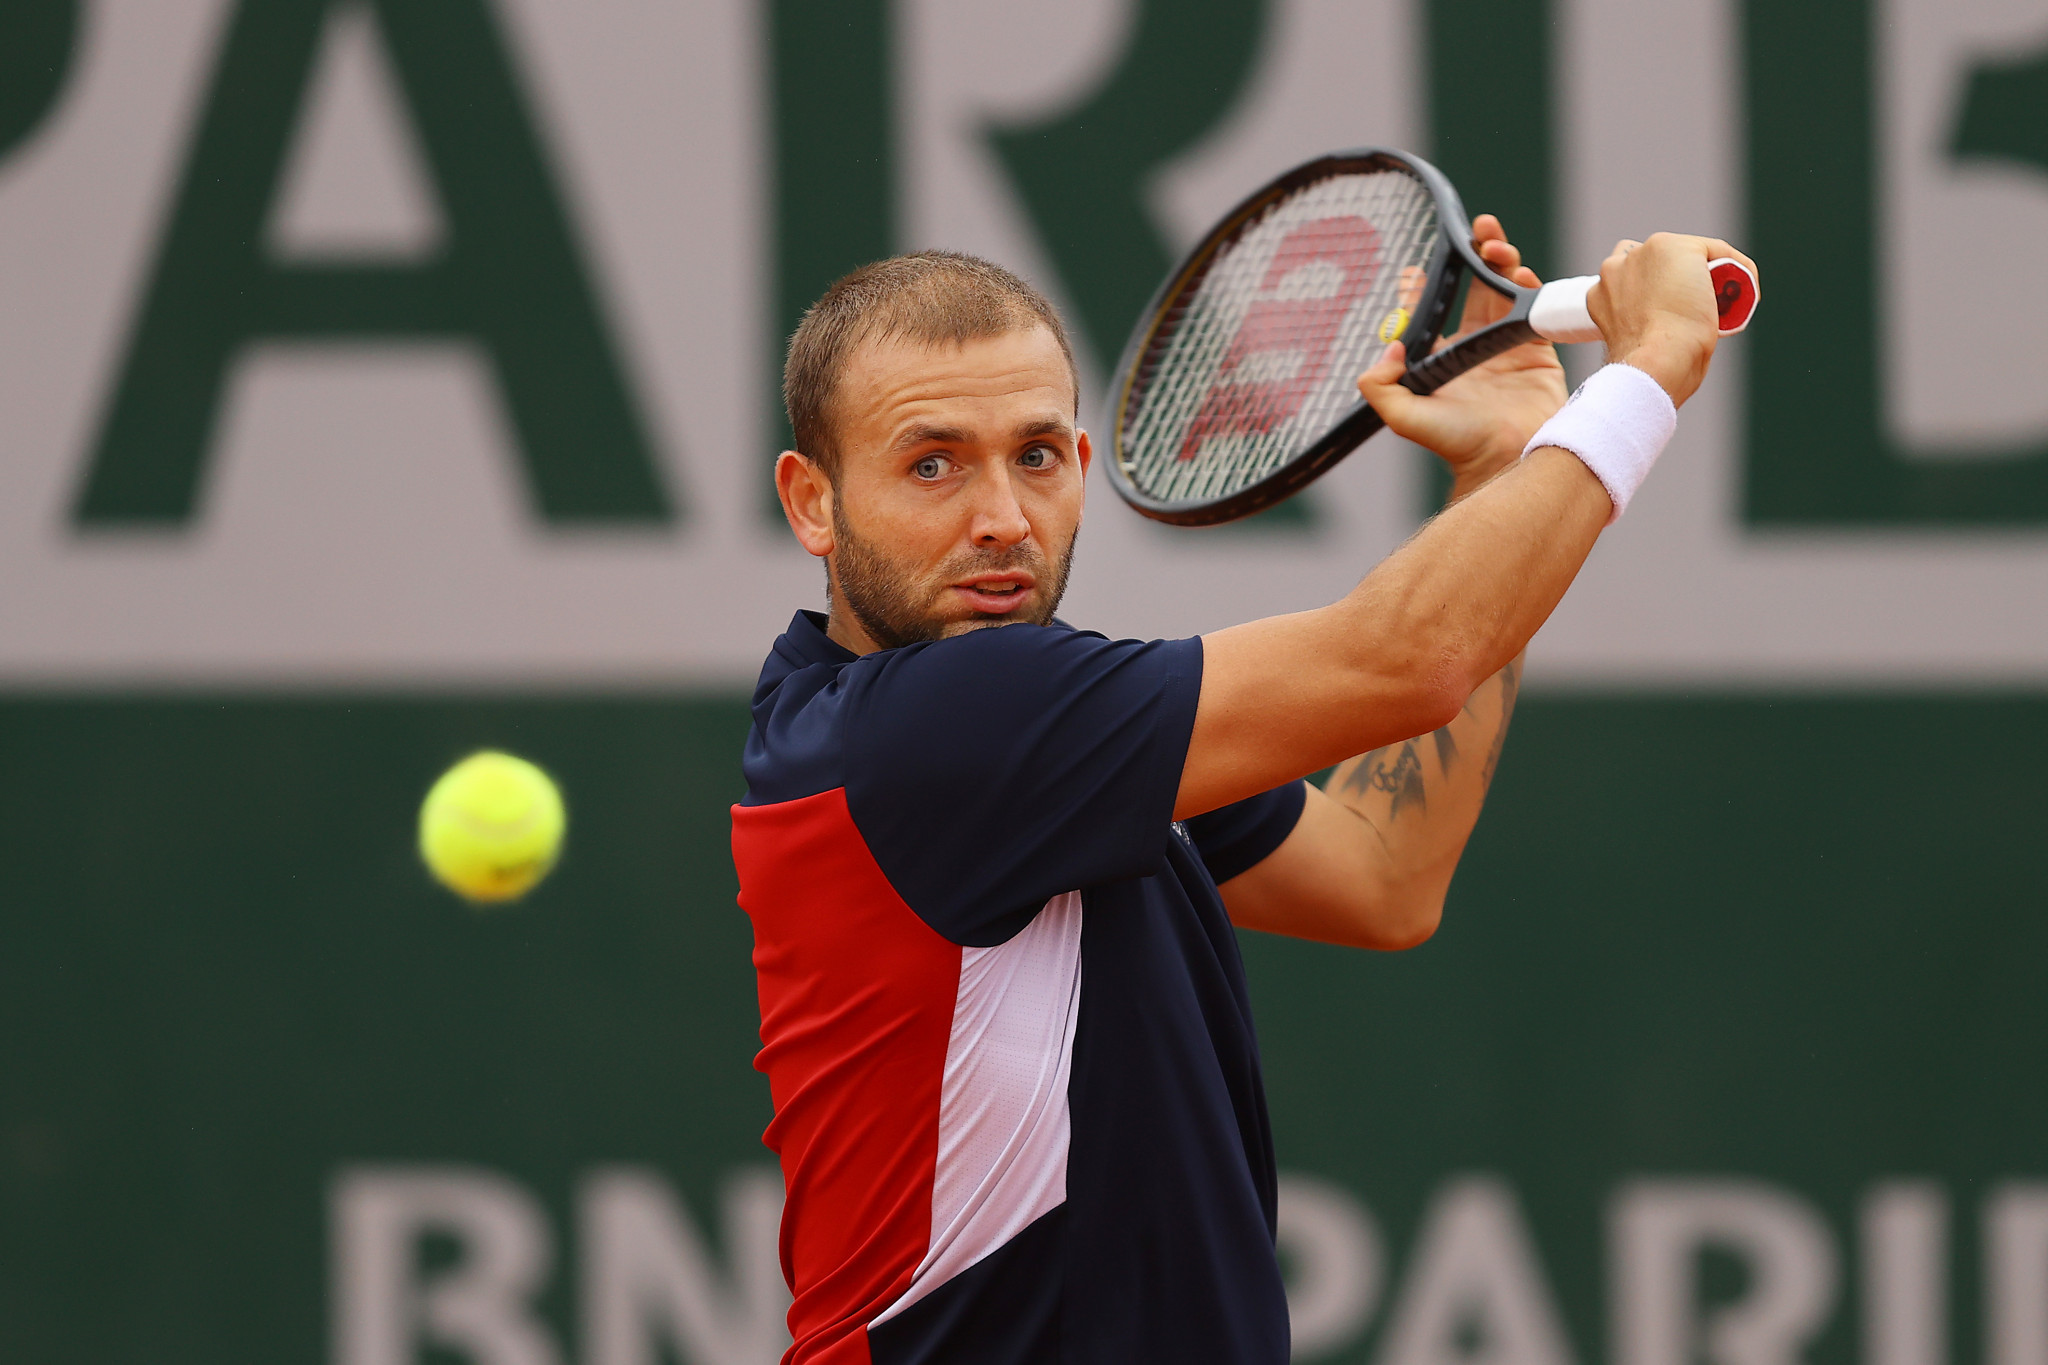 Dan Evans criticised the conduct of his opponents in the men's doubles first round ©Getty Images